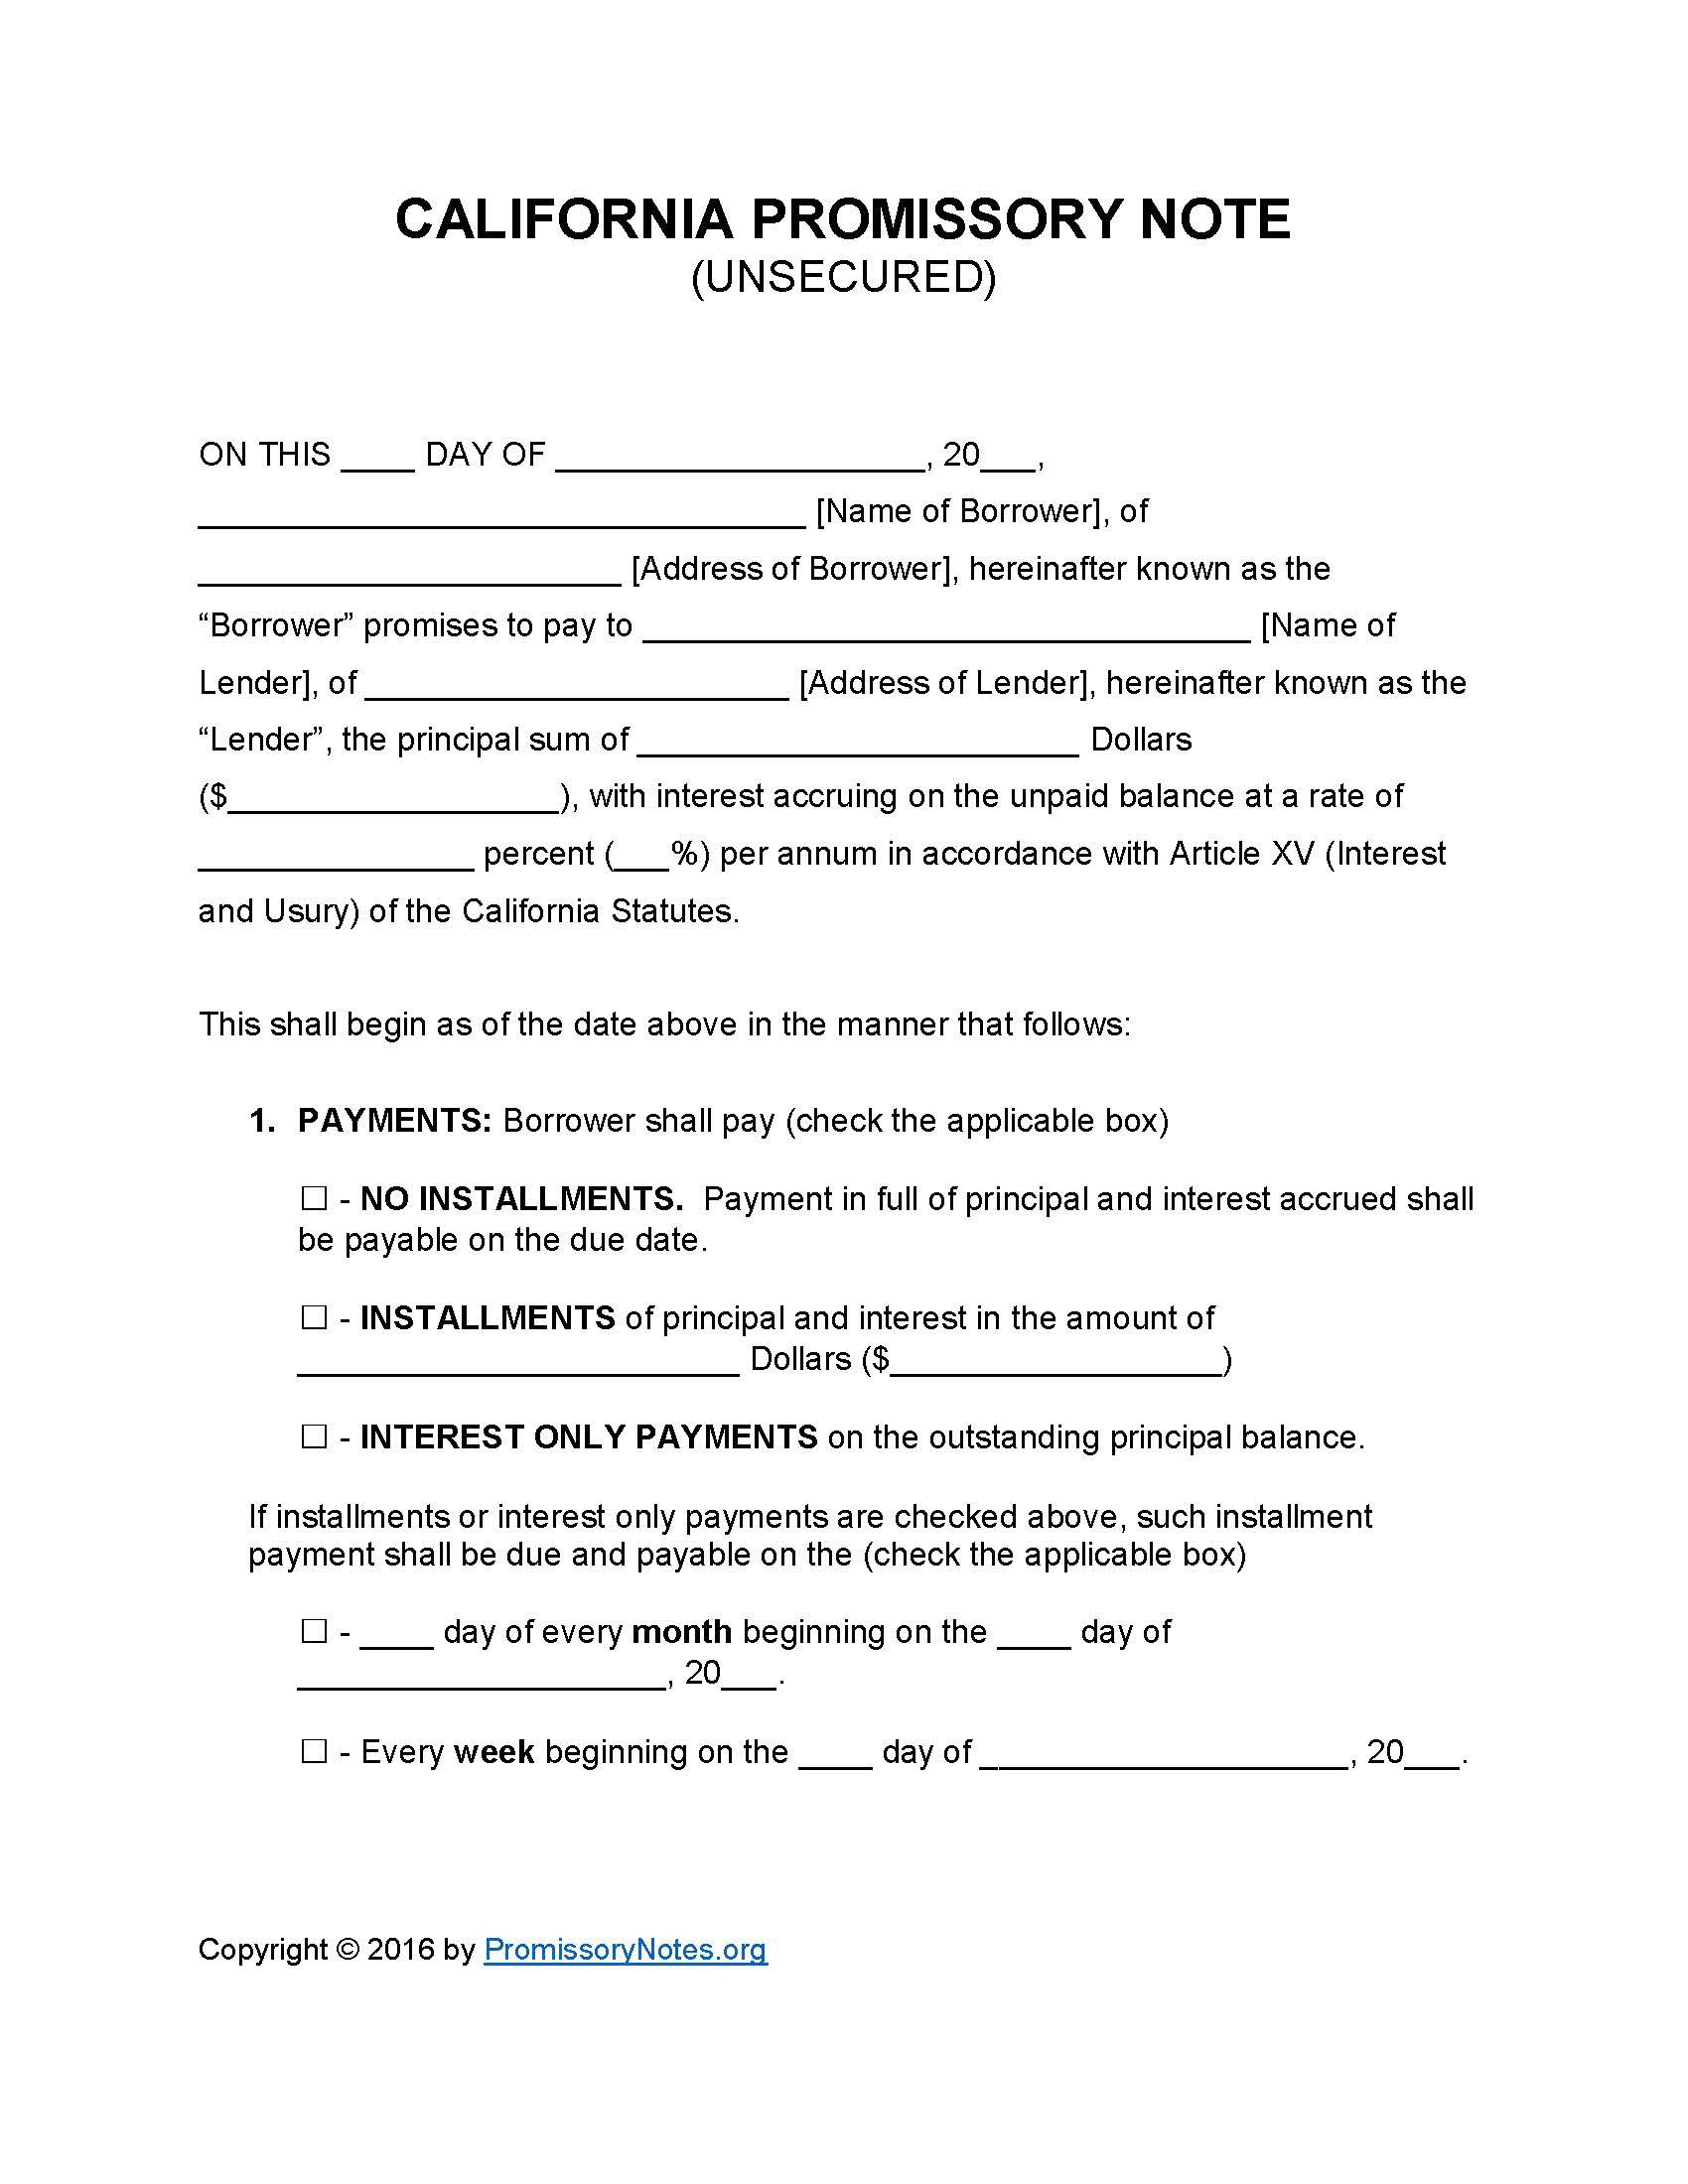 California Unsecured Promissory Note Template - Promissory Notes - Free Printable Promissory Note Pdf